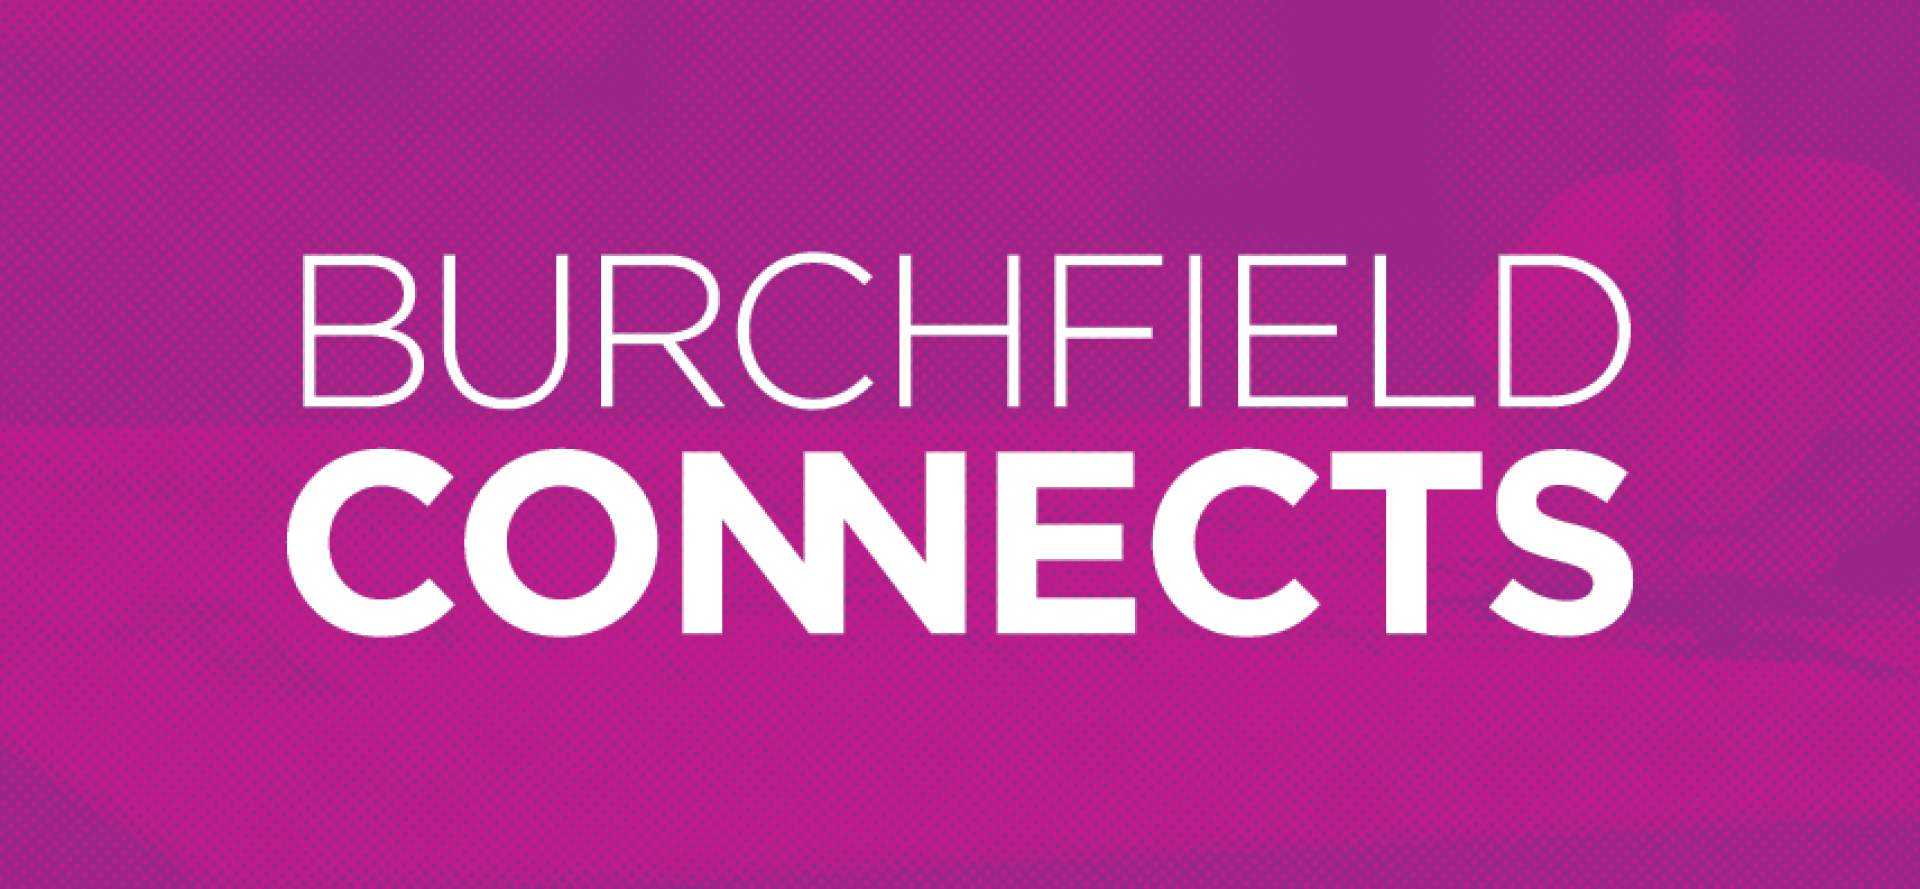 Burchfield Connects